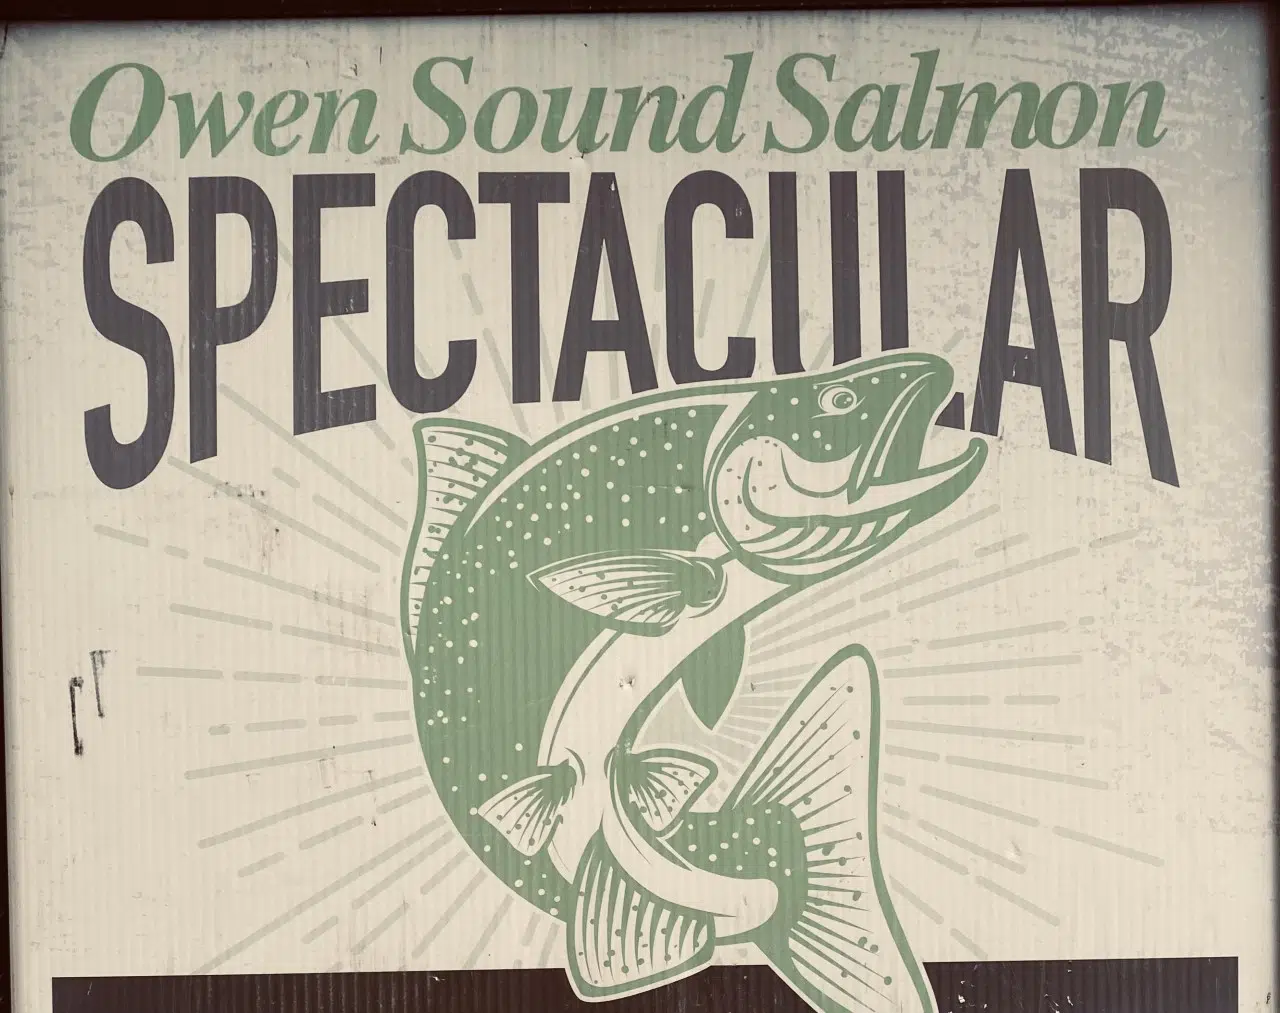 New Trout Leader At Owen Sound Salmon Spectacular